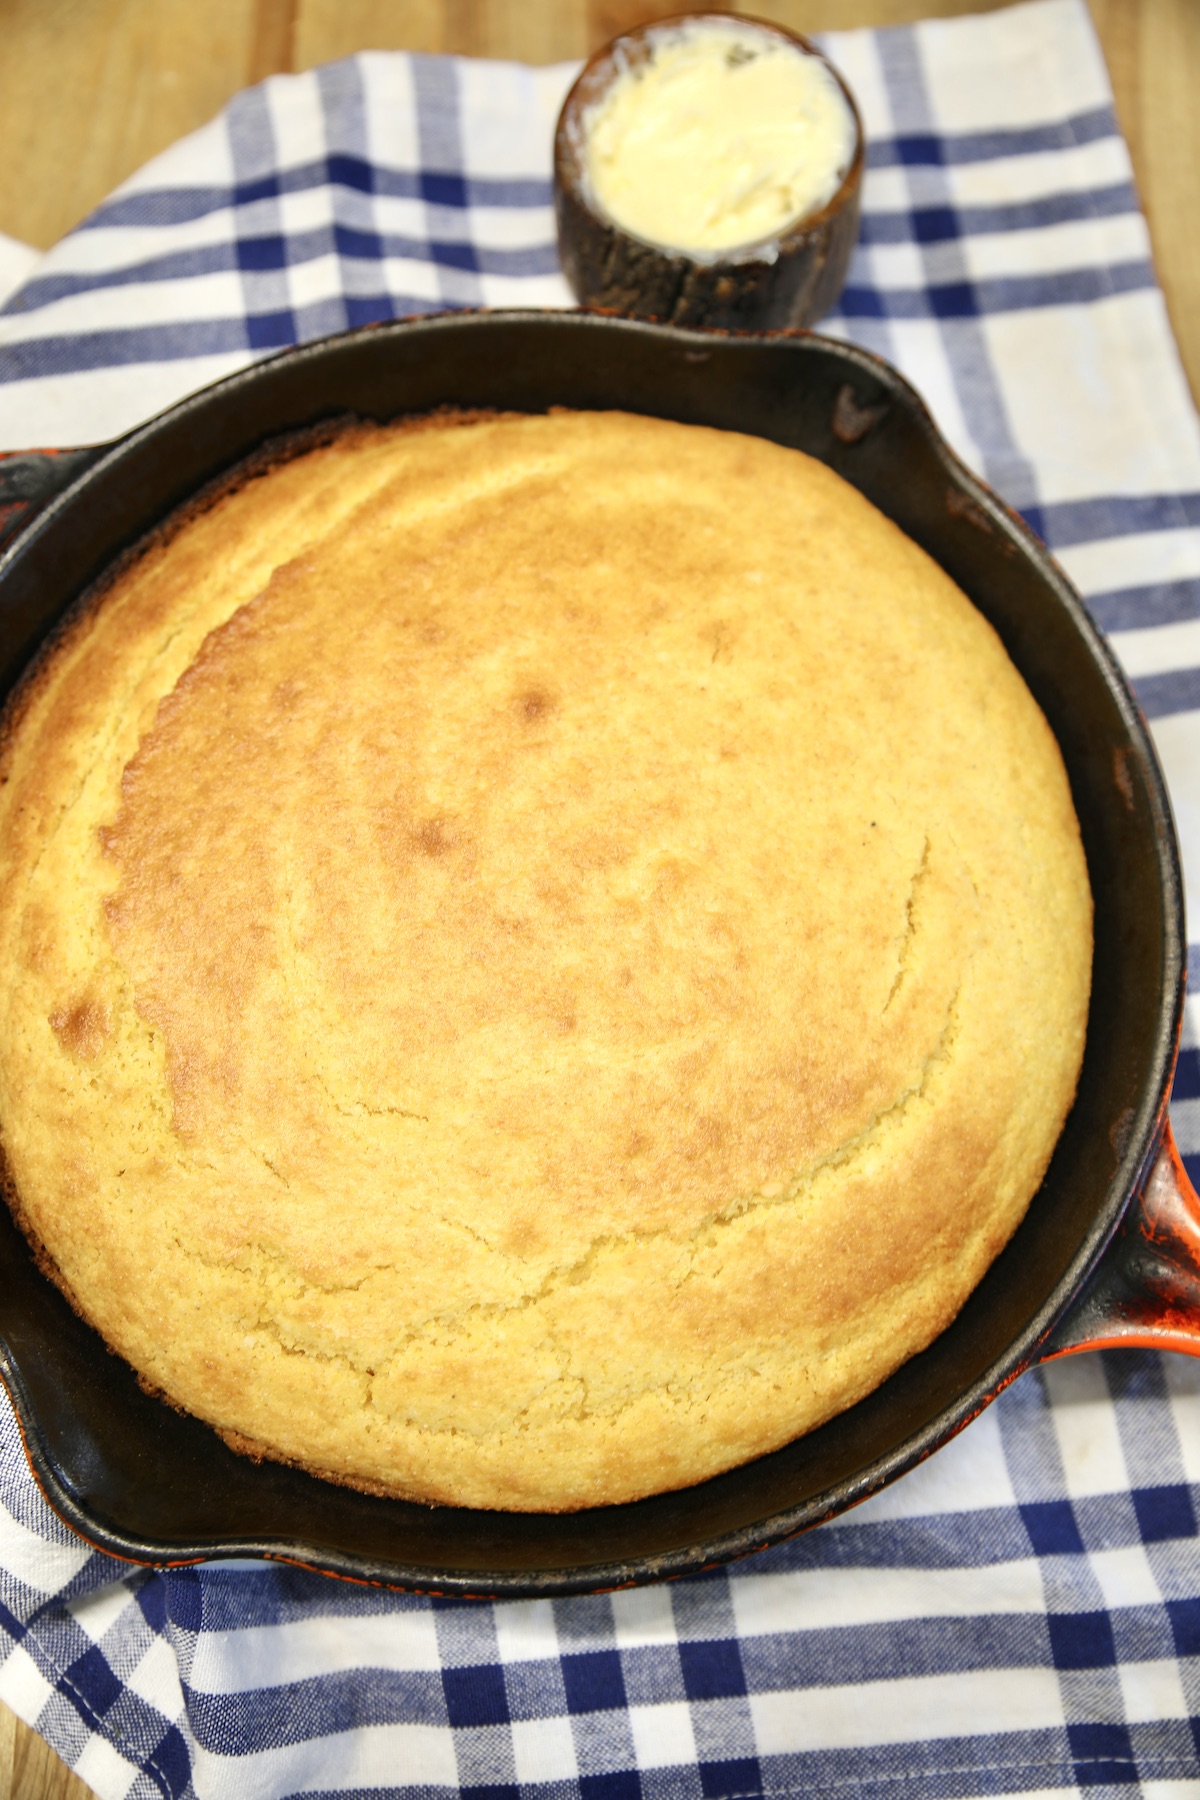 Skillet of cornbread on a blue and white towel, bowl of butter.